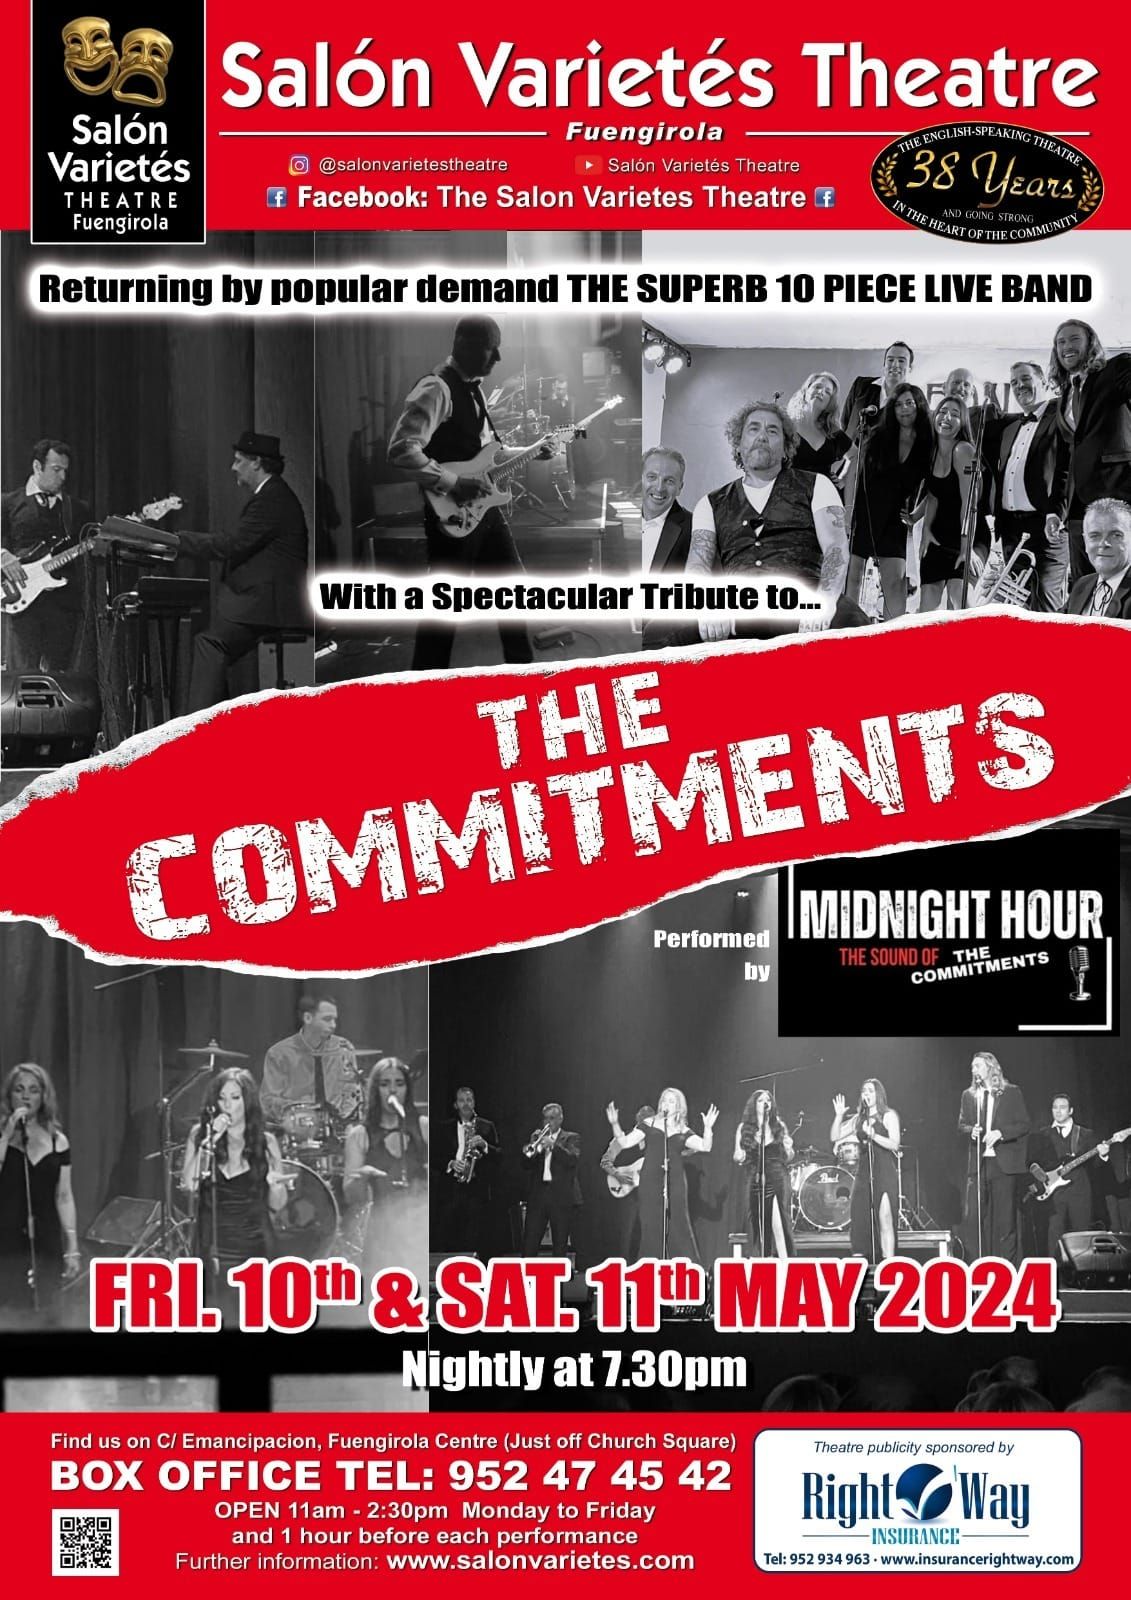 Live in Concert ....Midnight Hour - The Sound of The Commitments  